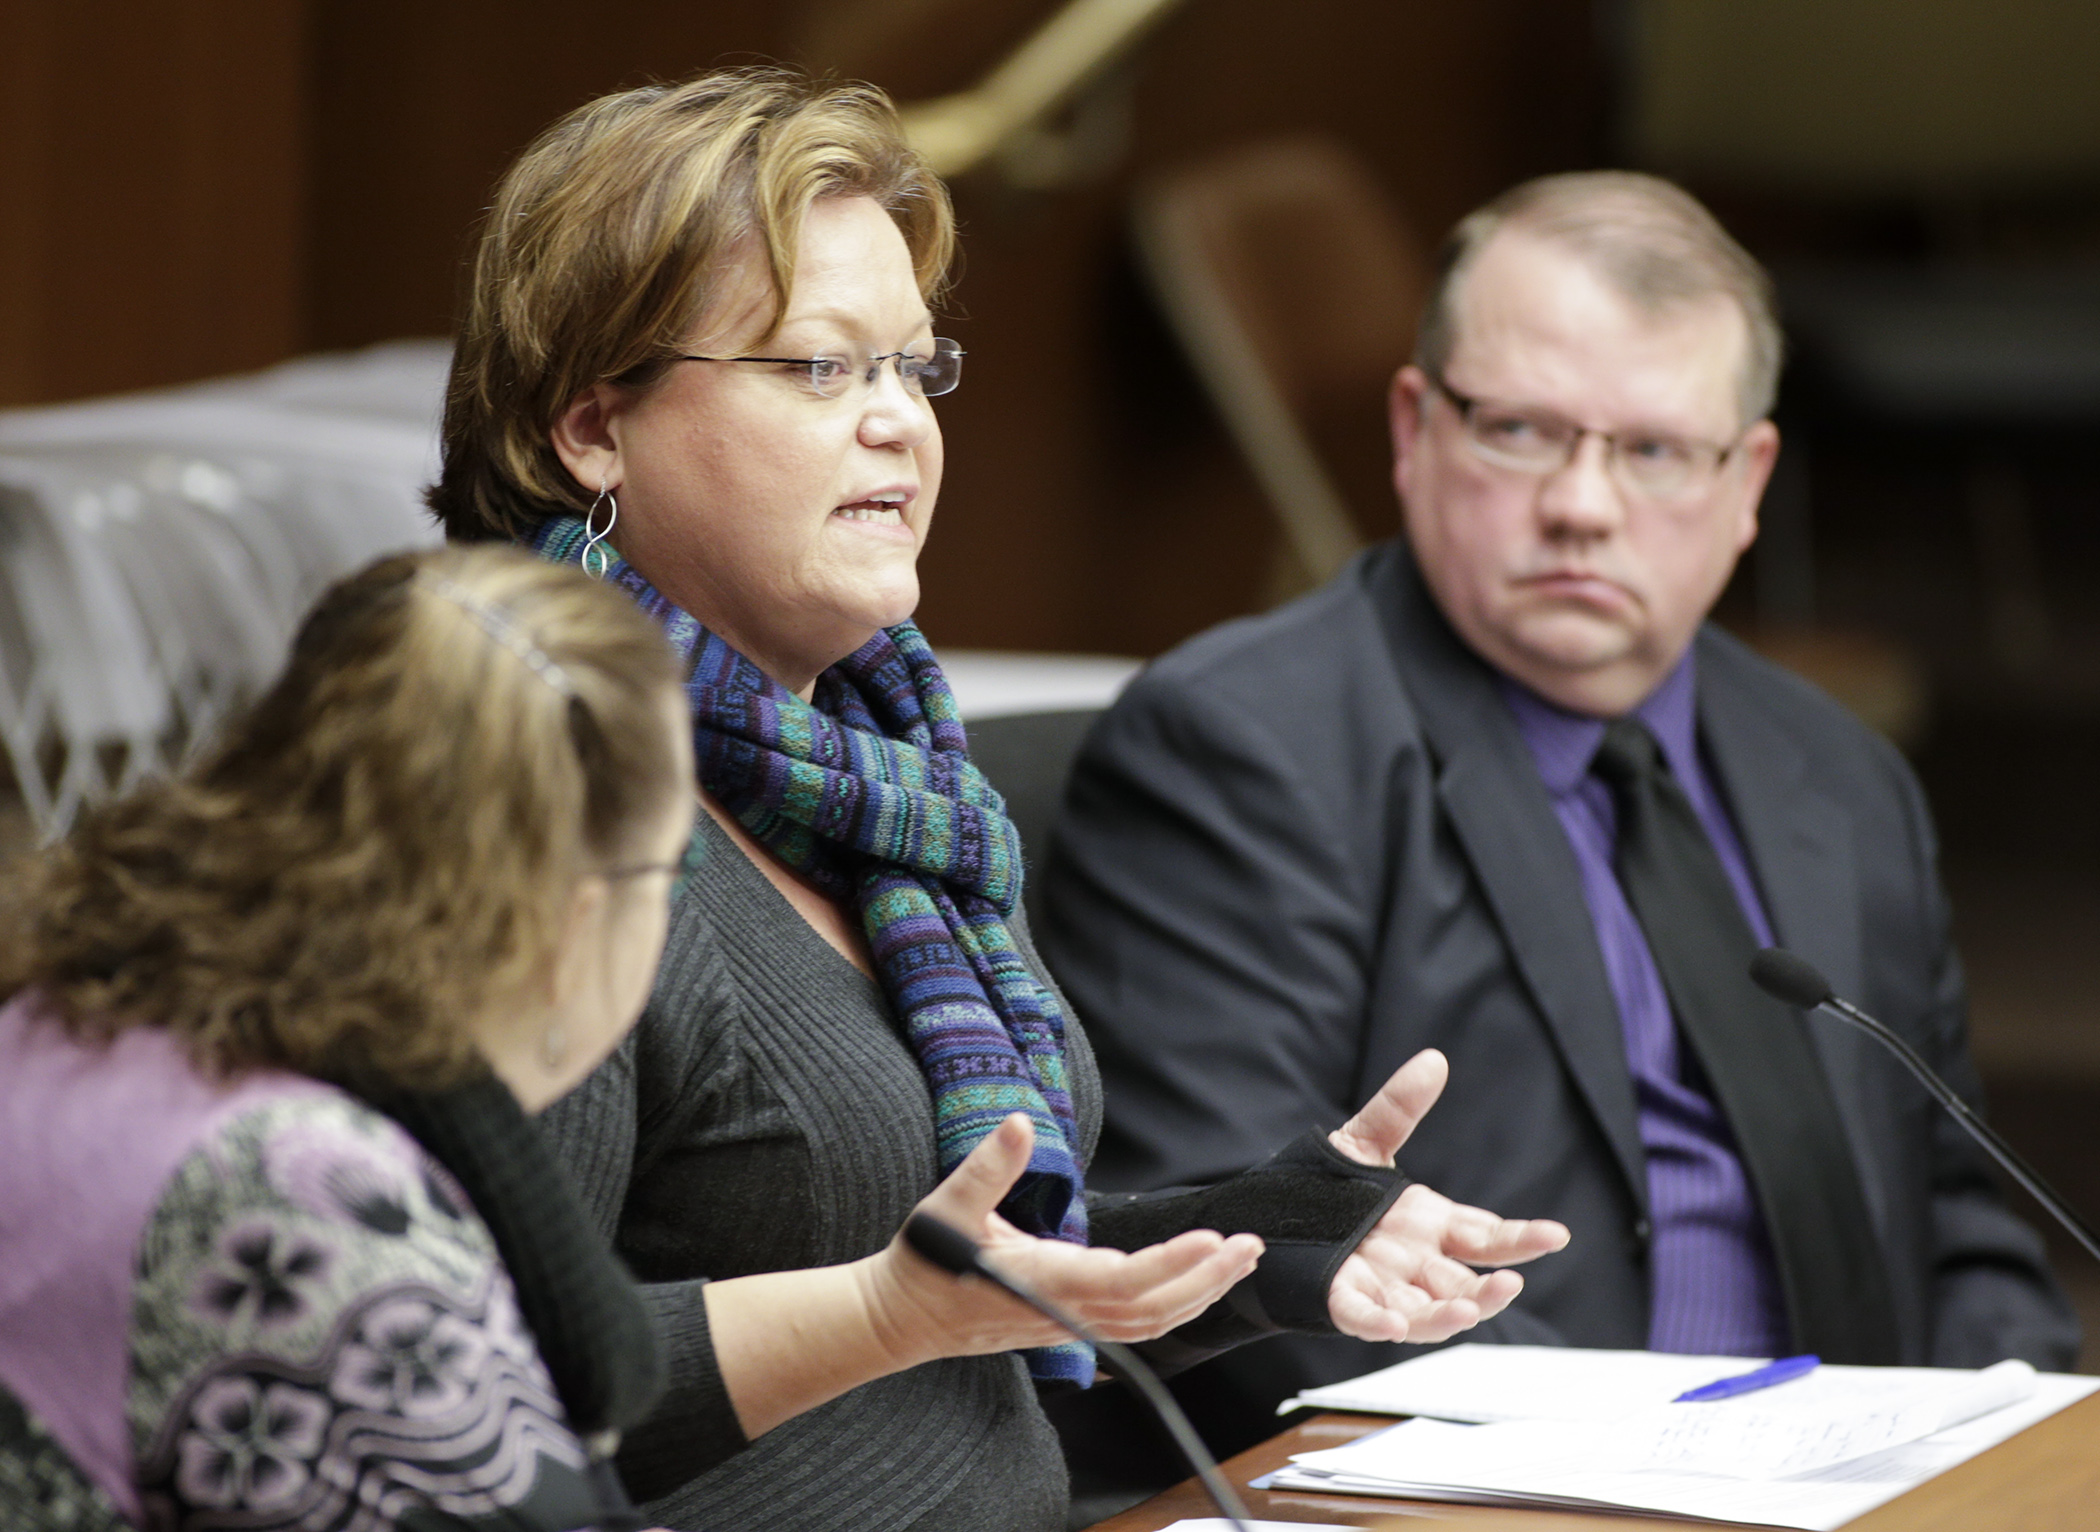 Kristi Weidlein, an English teacher with the Anoka-Hennepin School District, testifies before the House Education Innovation Committee Jan. 24 against HF386, sponsored by Rep. Ron Kresha, right, that would allow a tax credit for donations to fund K-12 scholarships. Photo by Paul Battaglia